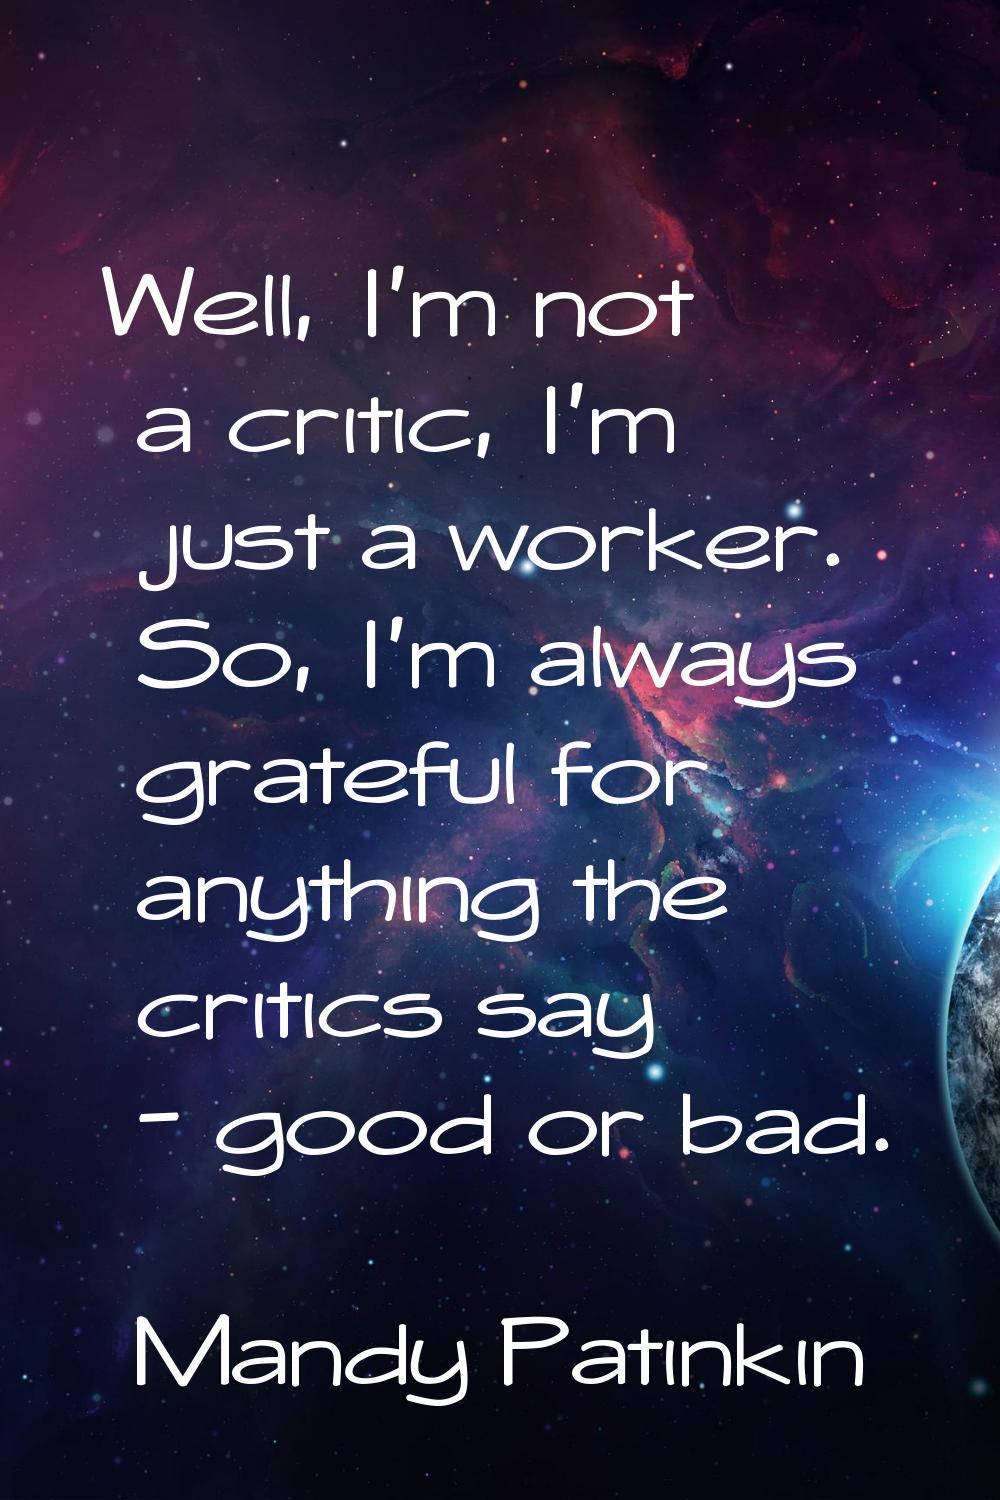 Well, I'm not a critic, I'm just a worker. So, I'm always grateful for anything the critics say - g